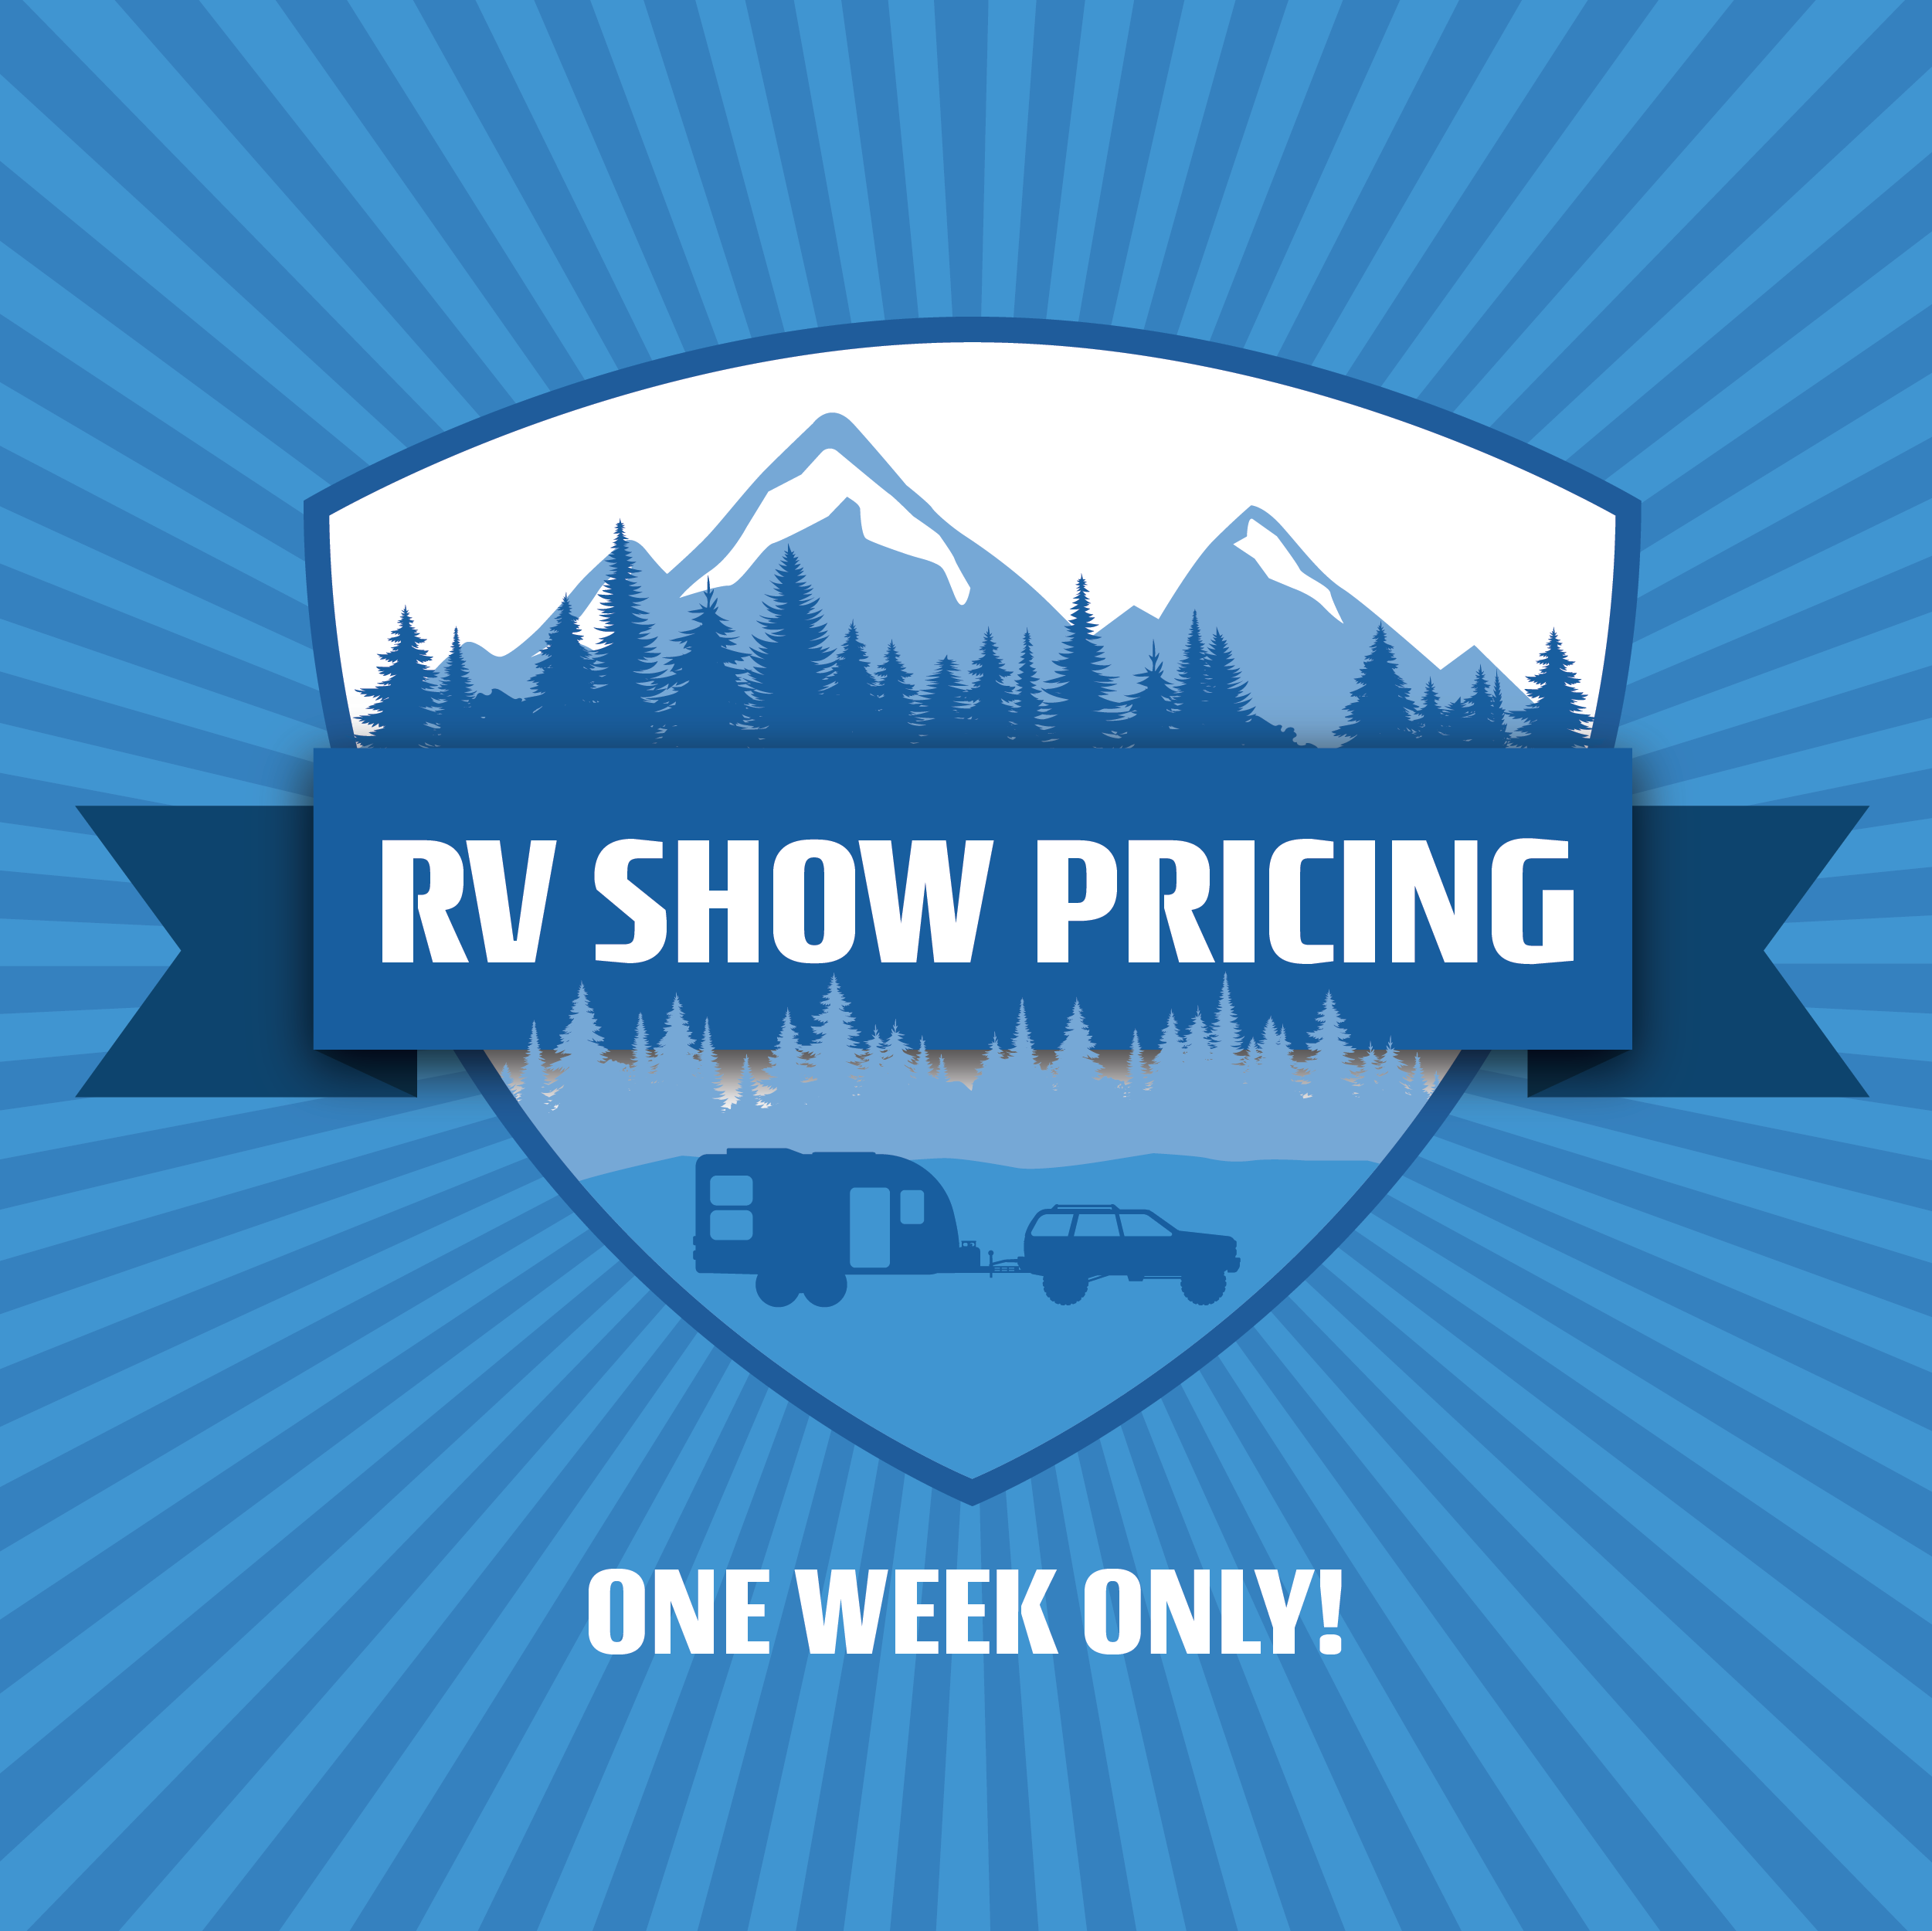 RV Show Pricing